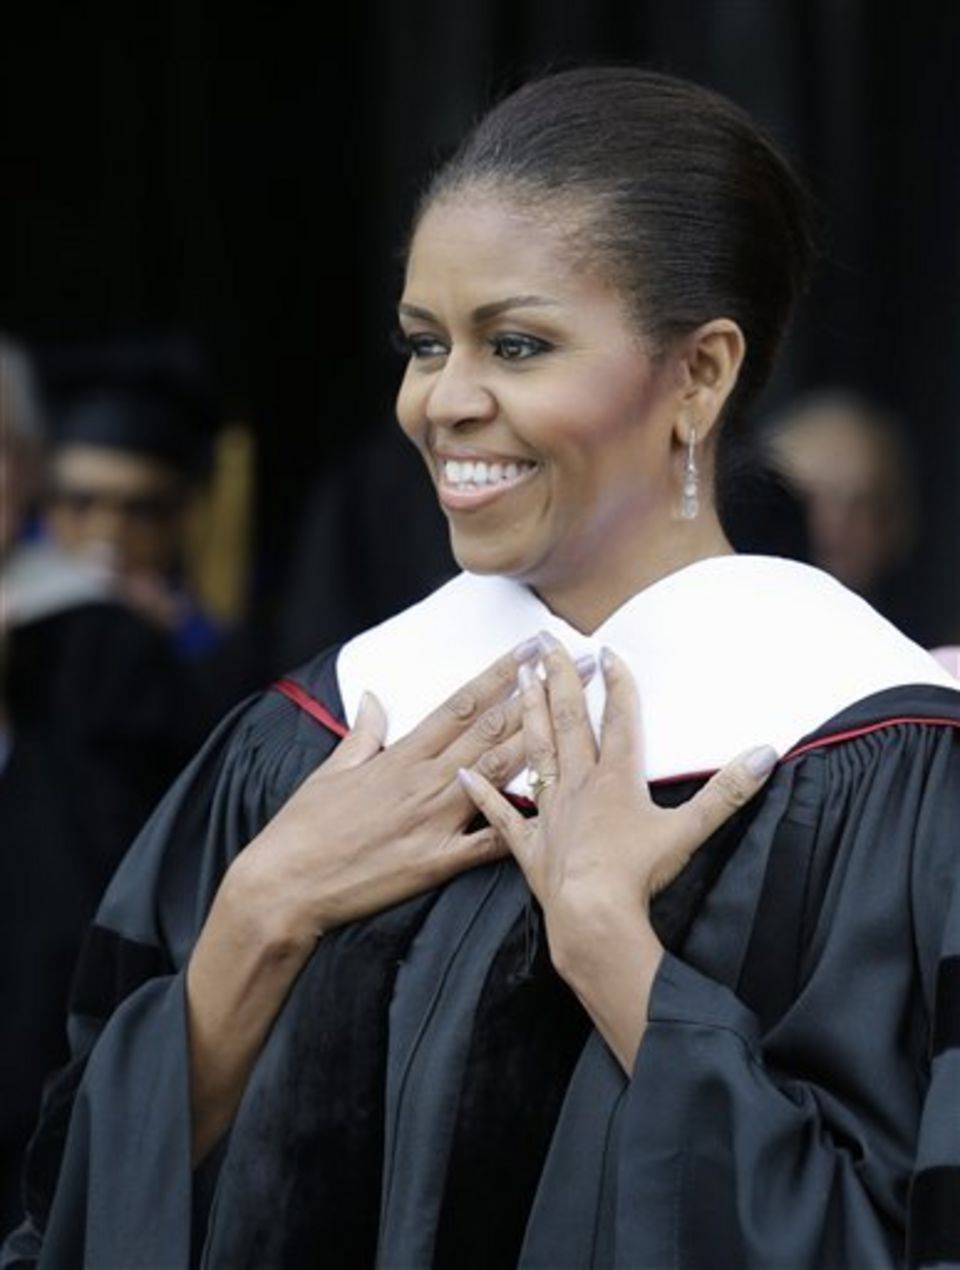 ANOTHER LEFT-WING RANT FROM THE FIRST LADY: Michelle Obama ‘Shapes a Revolution’ at Oberlin